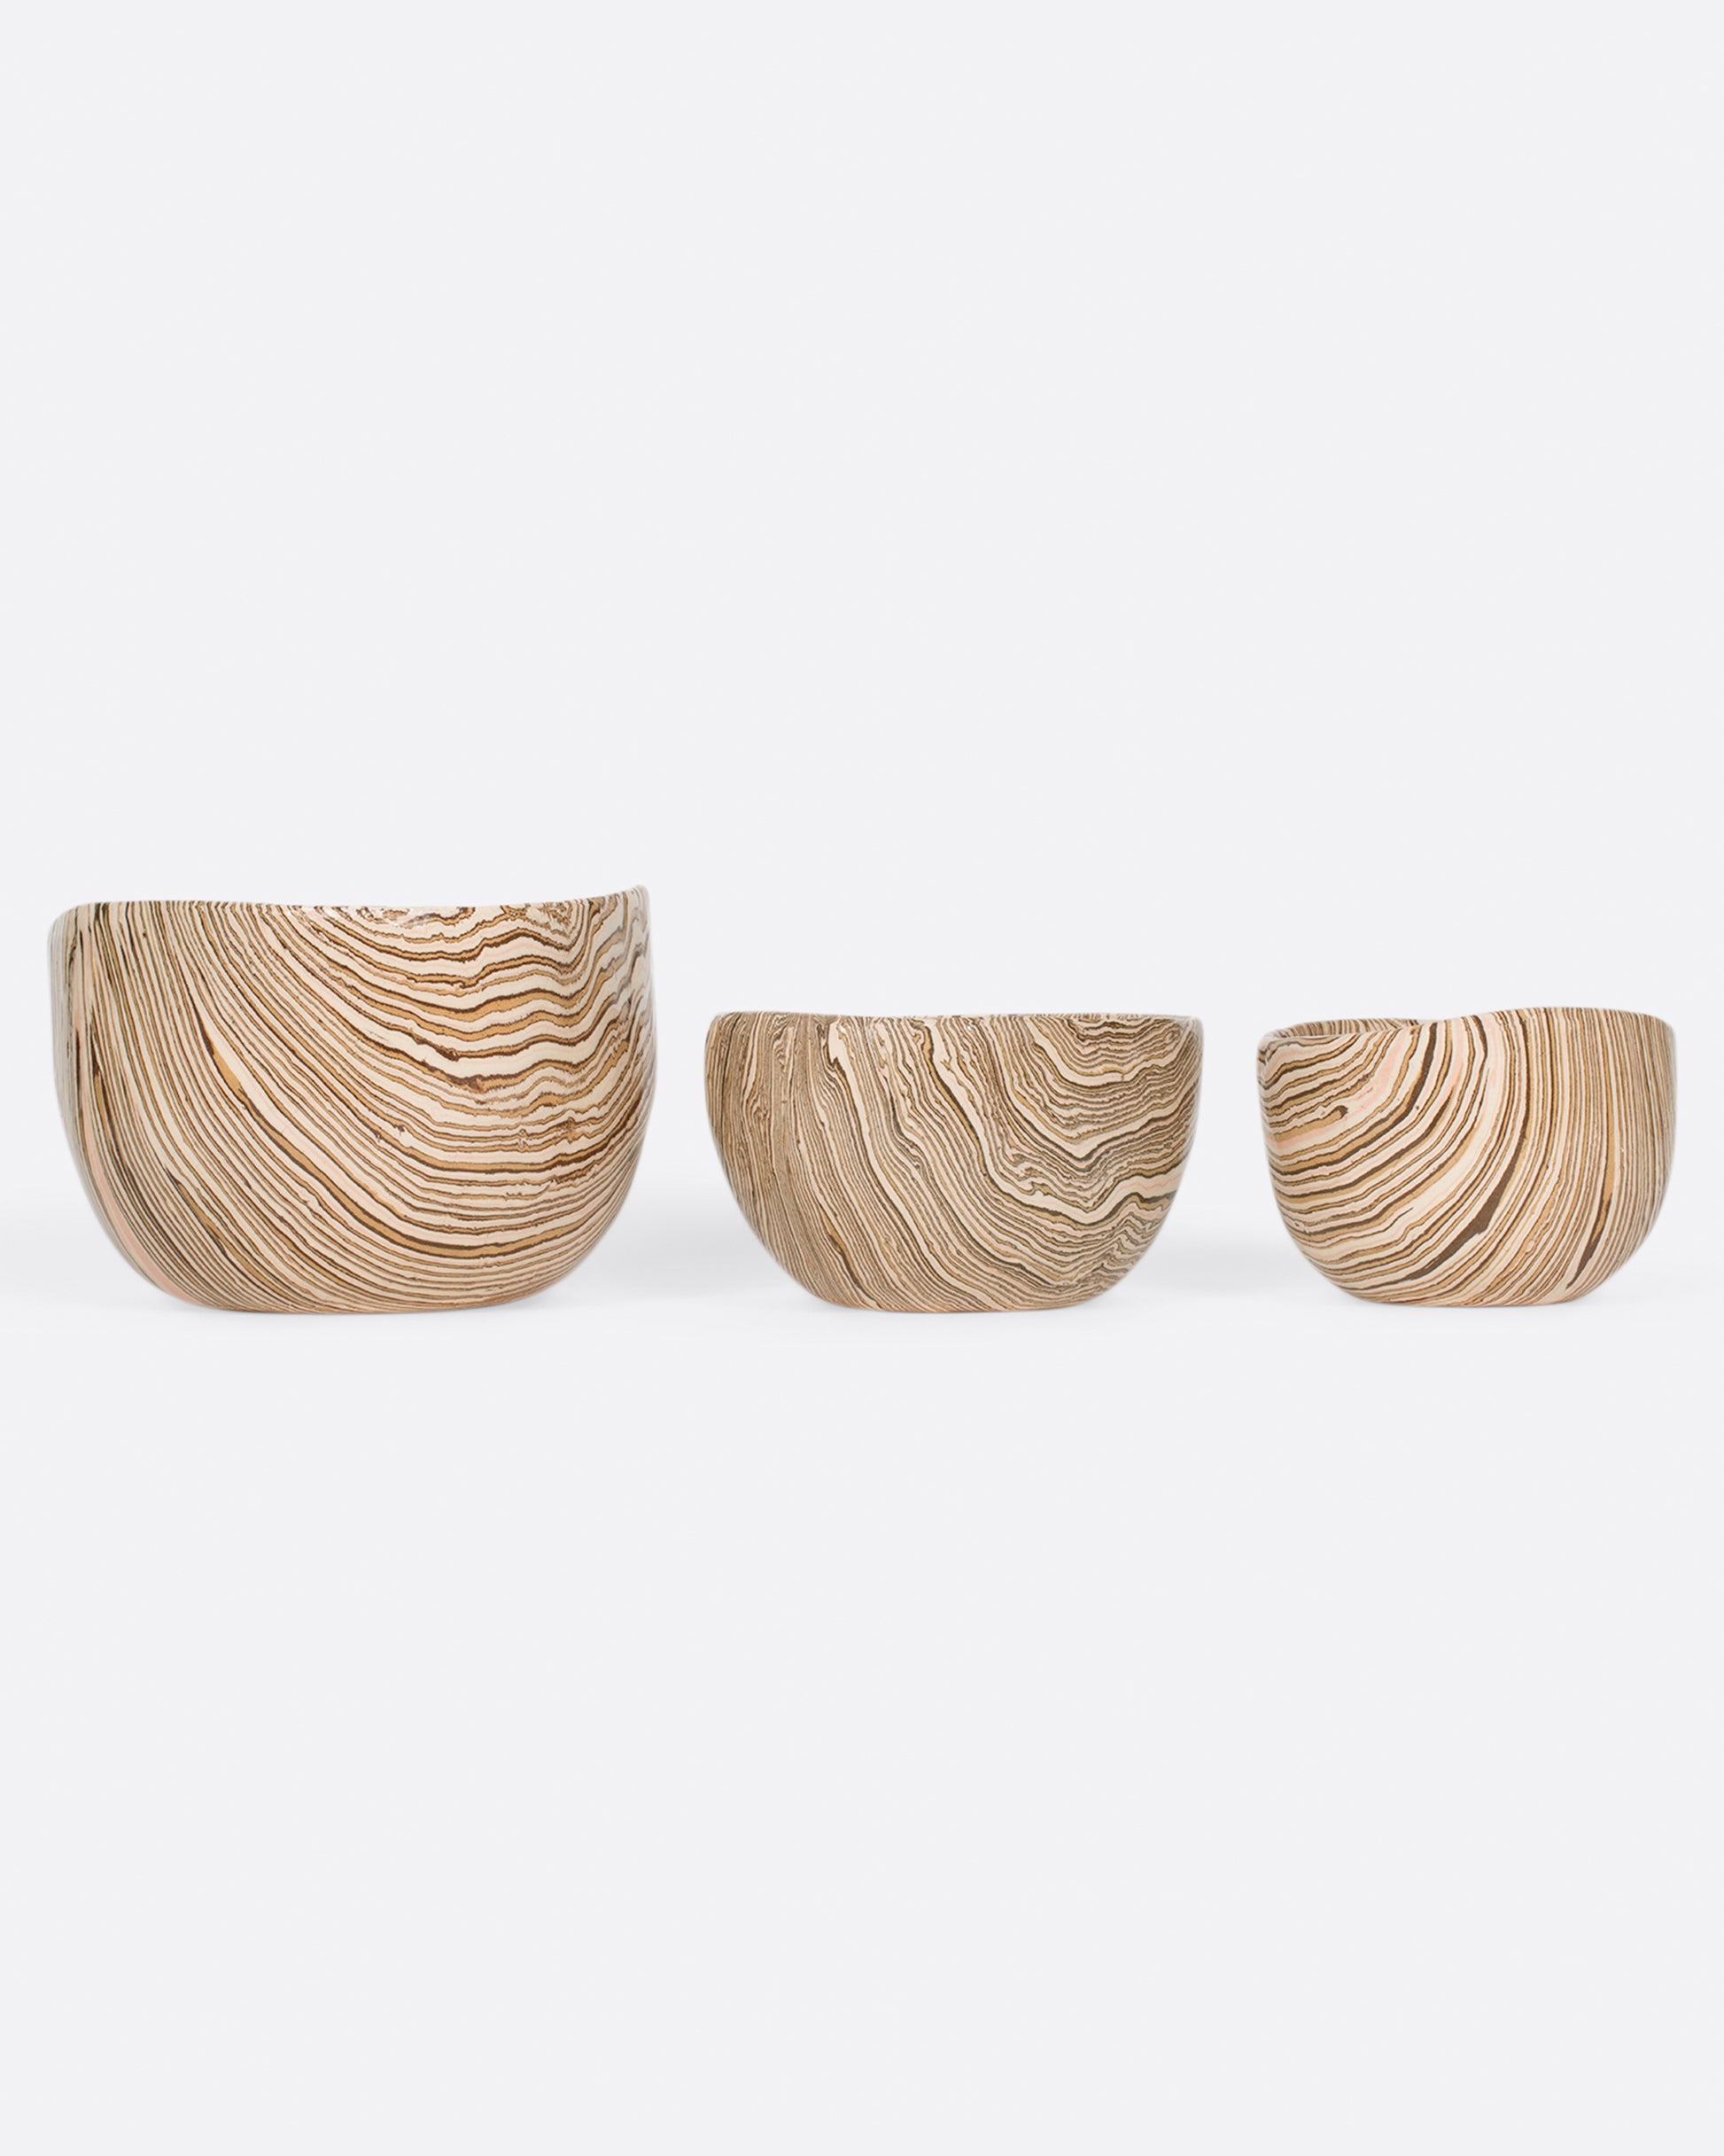 A new iteration of these beloved nerikomi bowls; this time in shades of brown and pink, fully glazed.